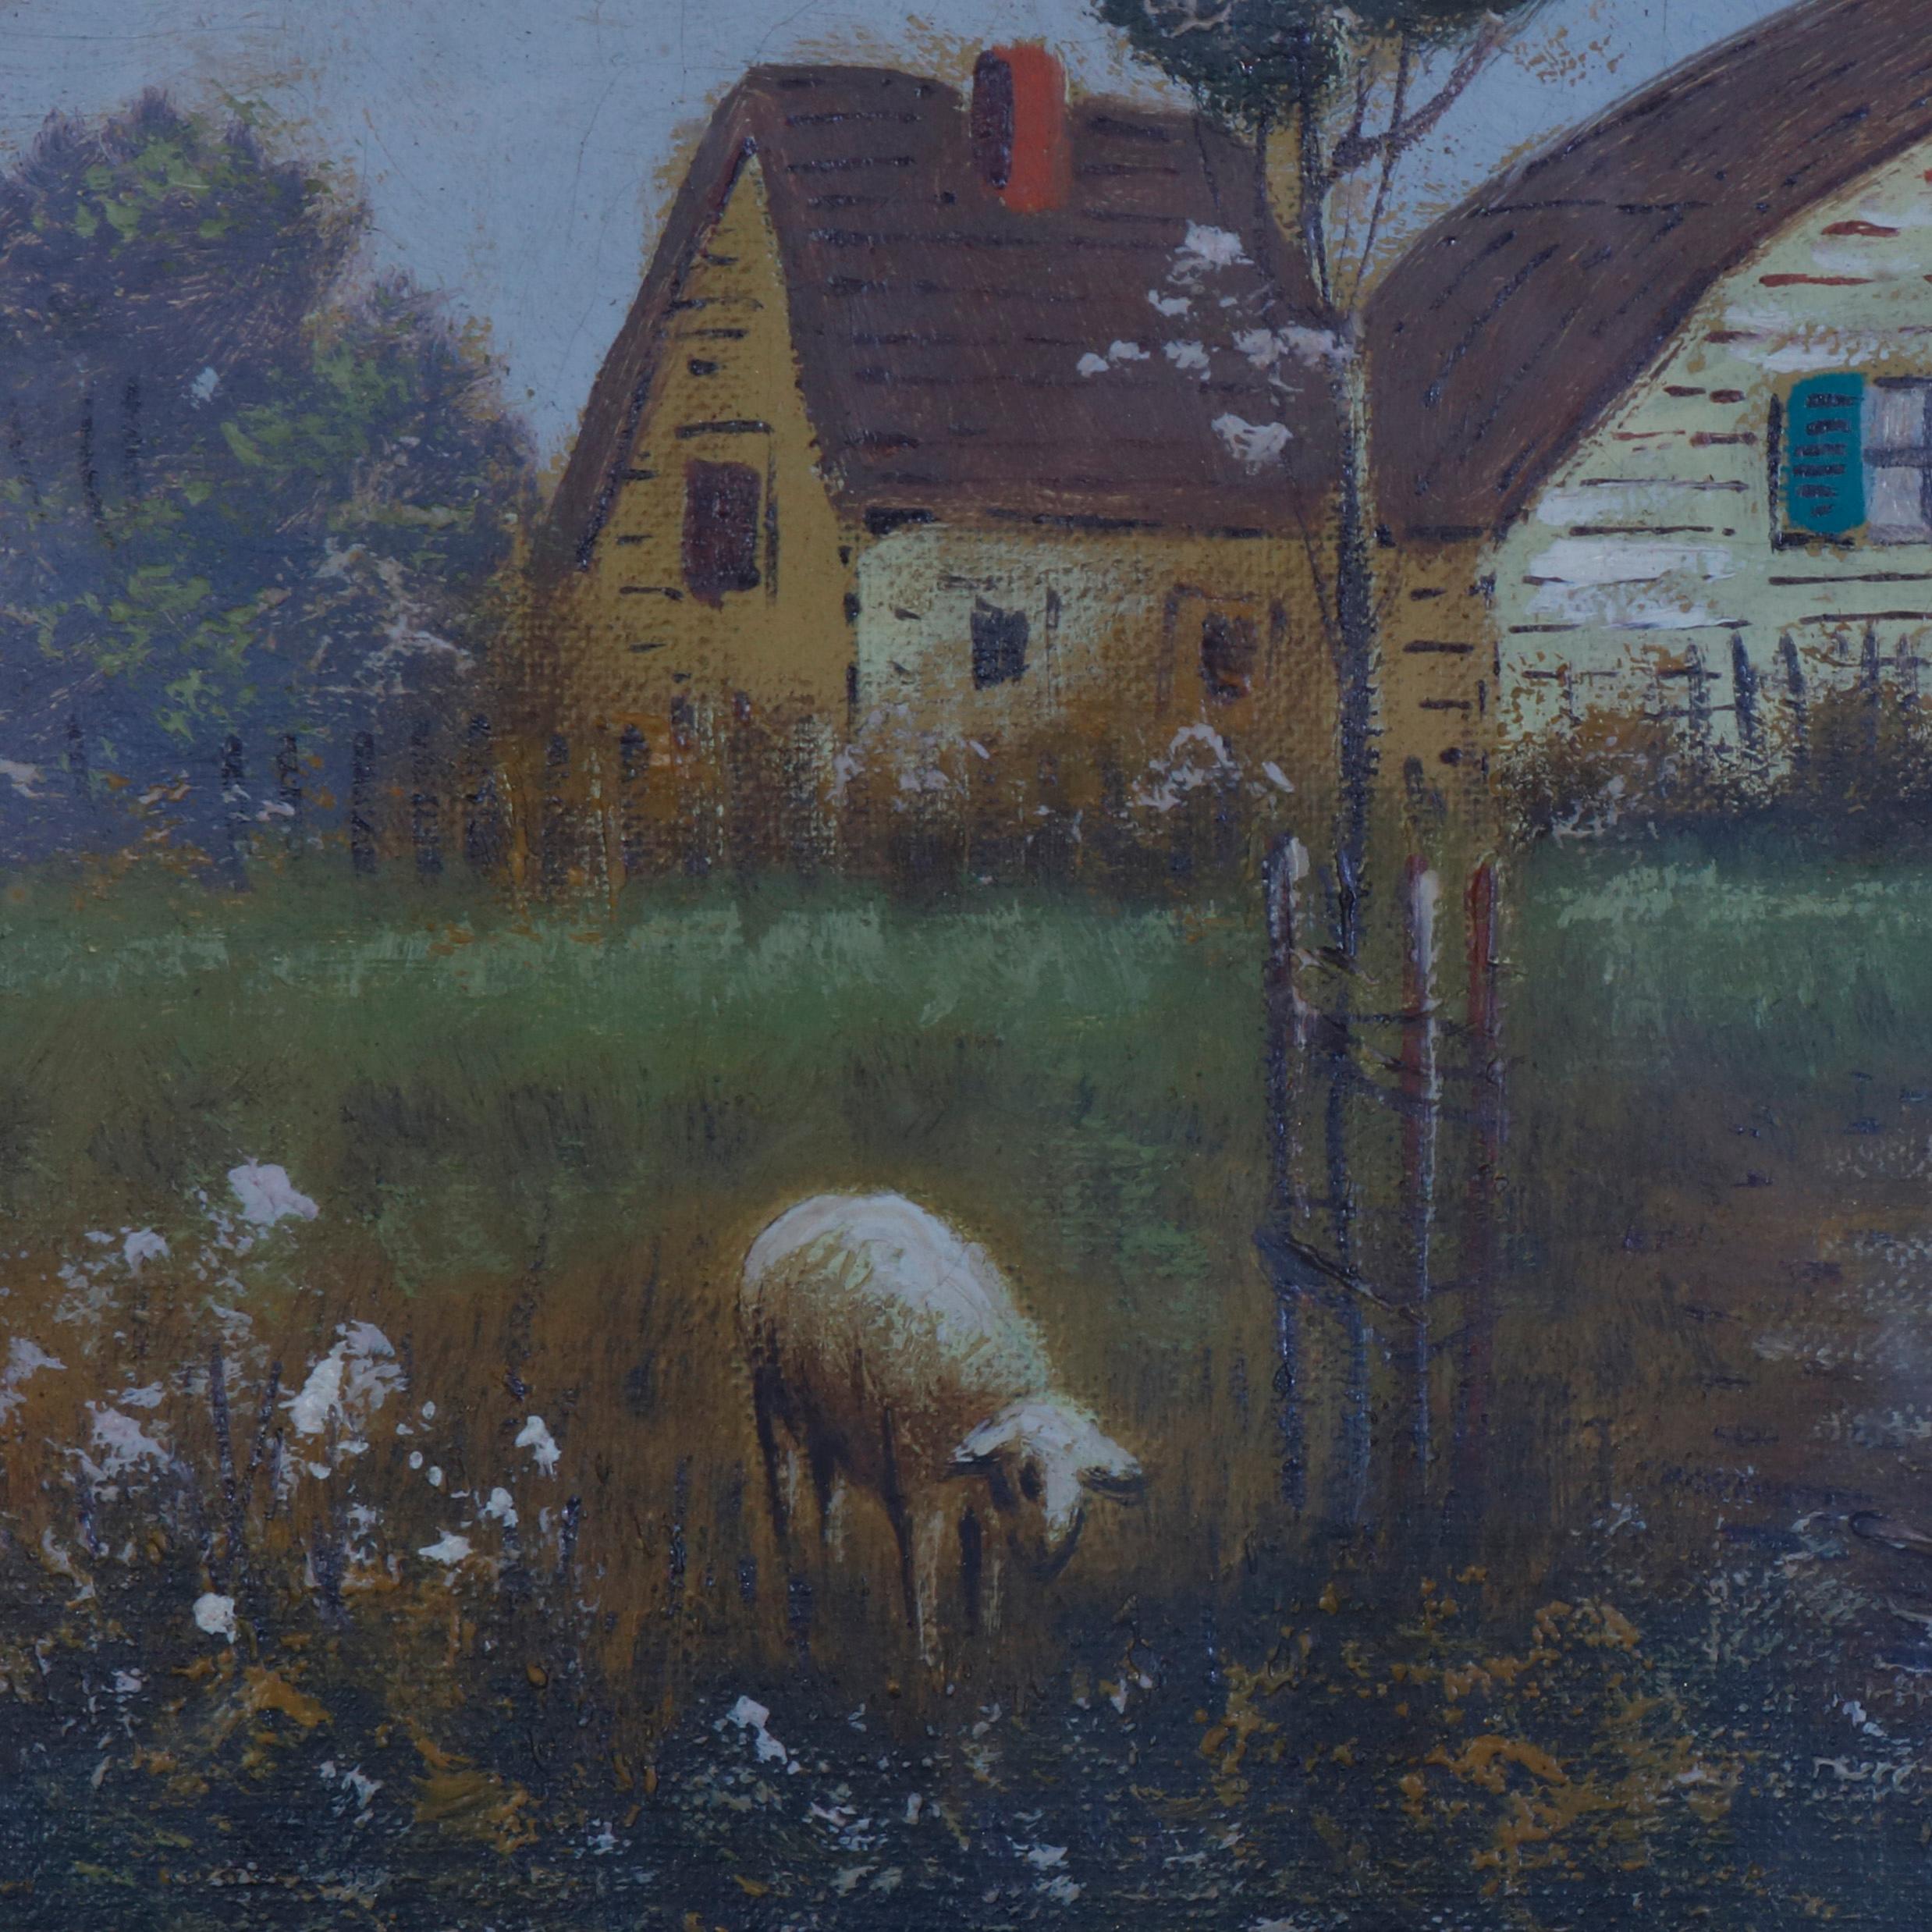 Hand-Painted Antique Shadowbox Folk Art Oil on Canvas Landscape Painting, Farm and Sheep